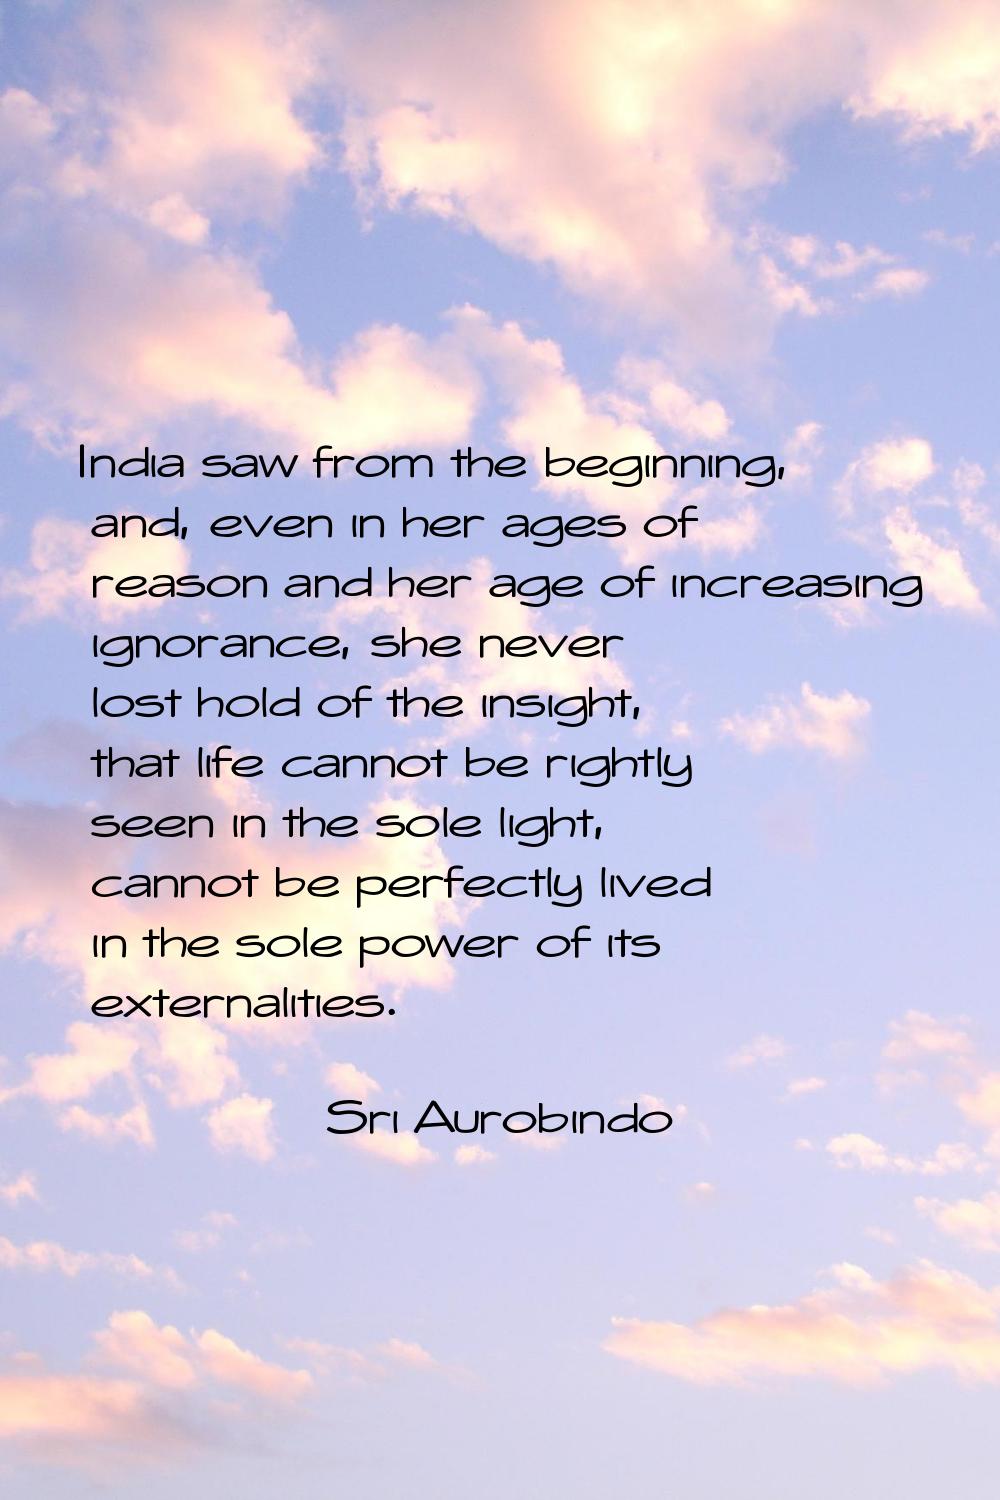 India saw from the beginning, and, even in her ages of reason and her age of increasing ignorance, 